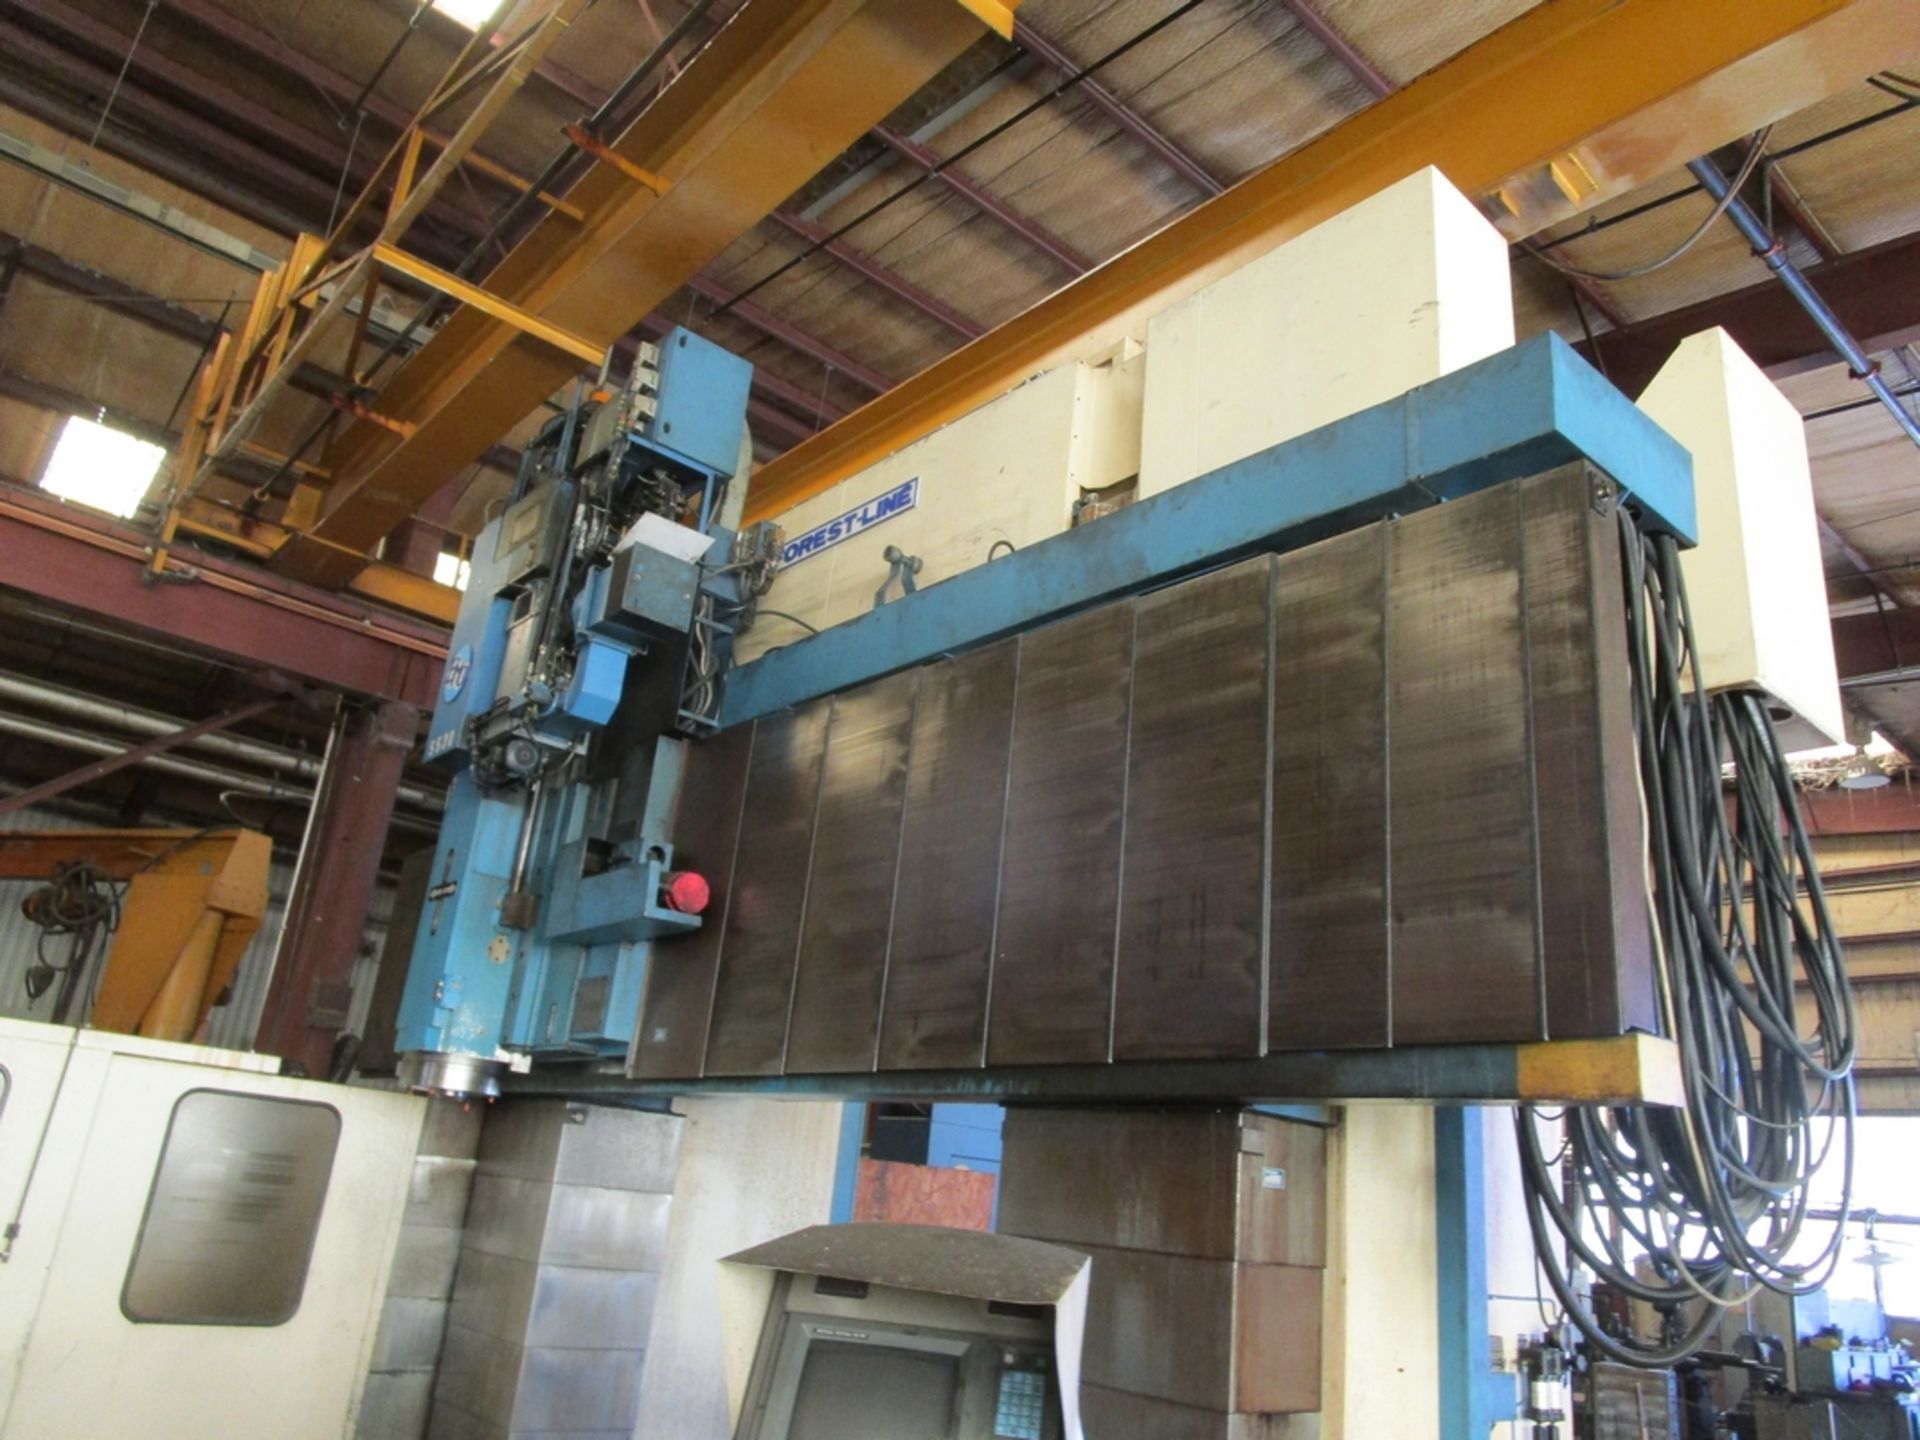 BMO Forest Line Veco Mill 450 CNC Bridgemill, S/N MO-3208, 1992 - Image 3 of 9